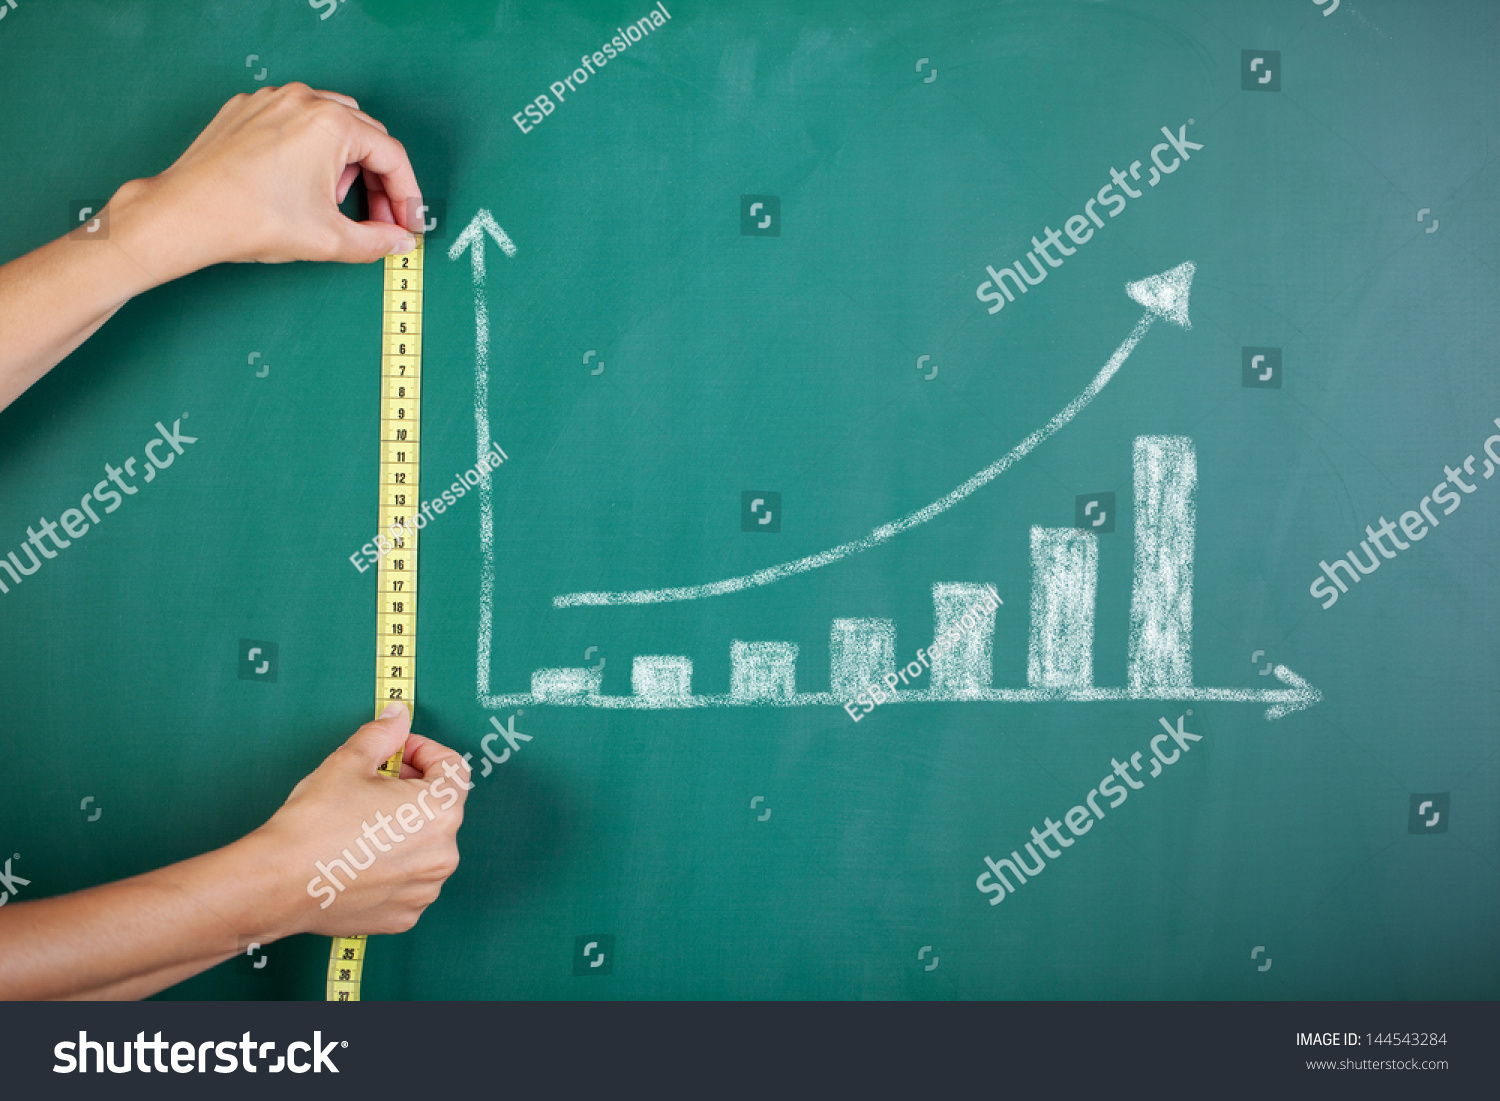 Closeup of woman's hands measuring bar graph with tape on blackboard #144543284